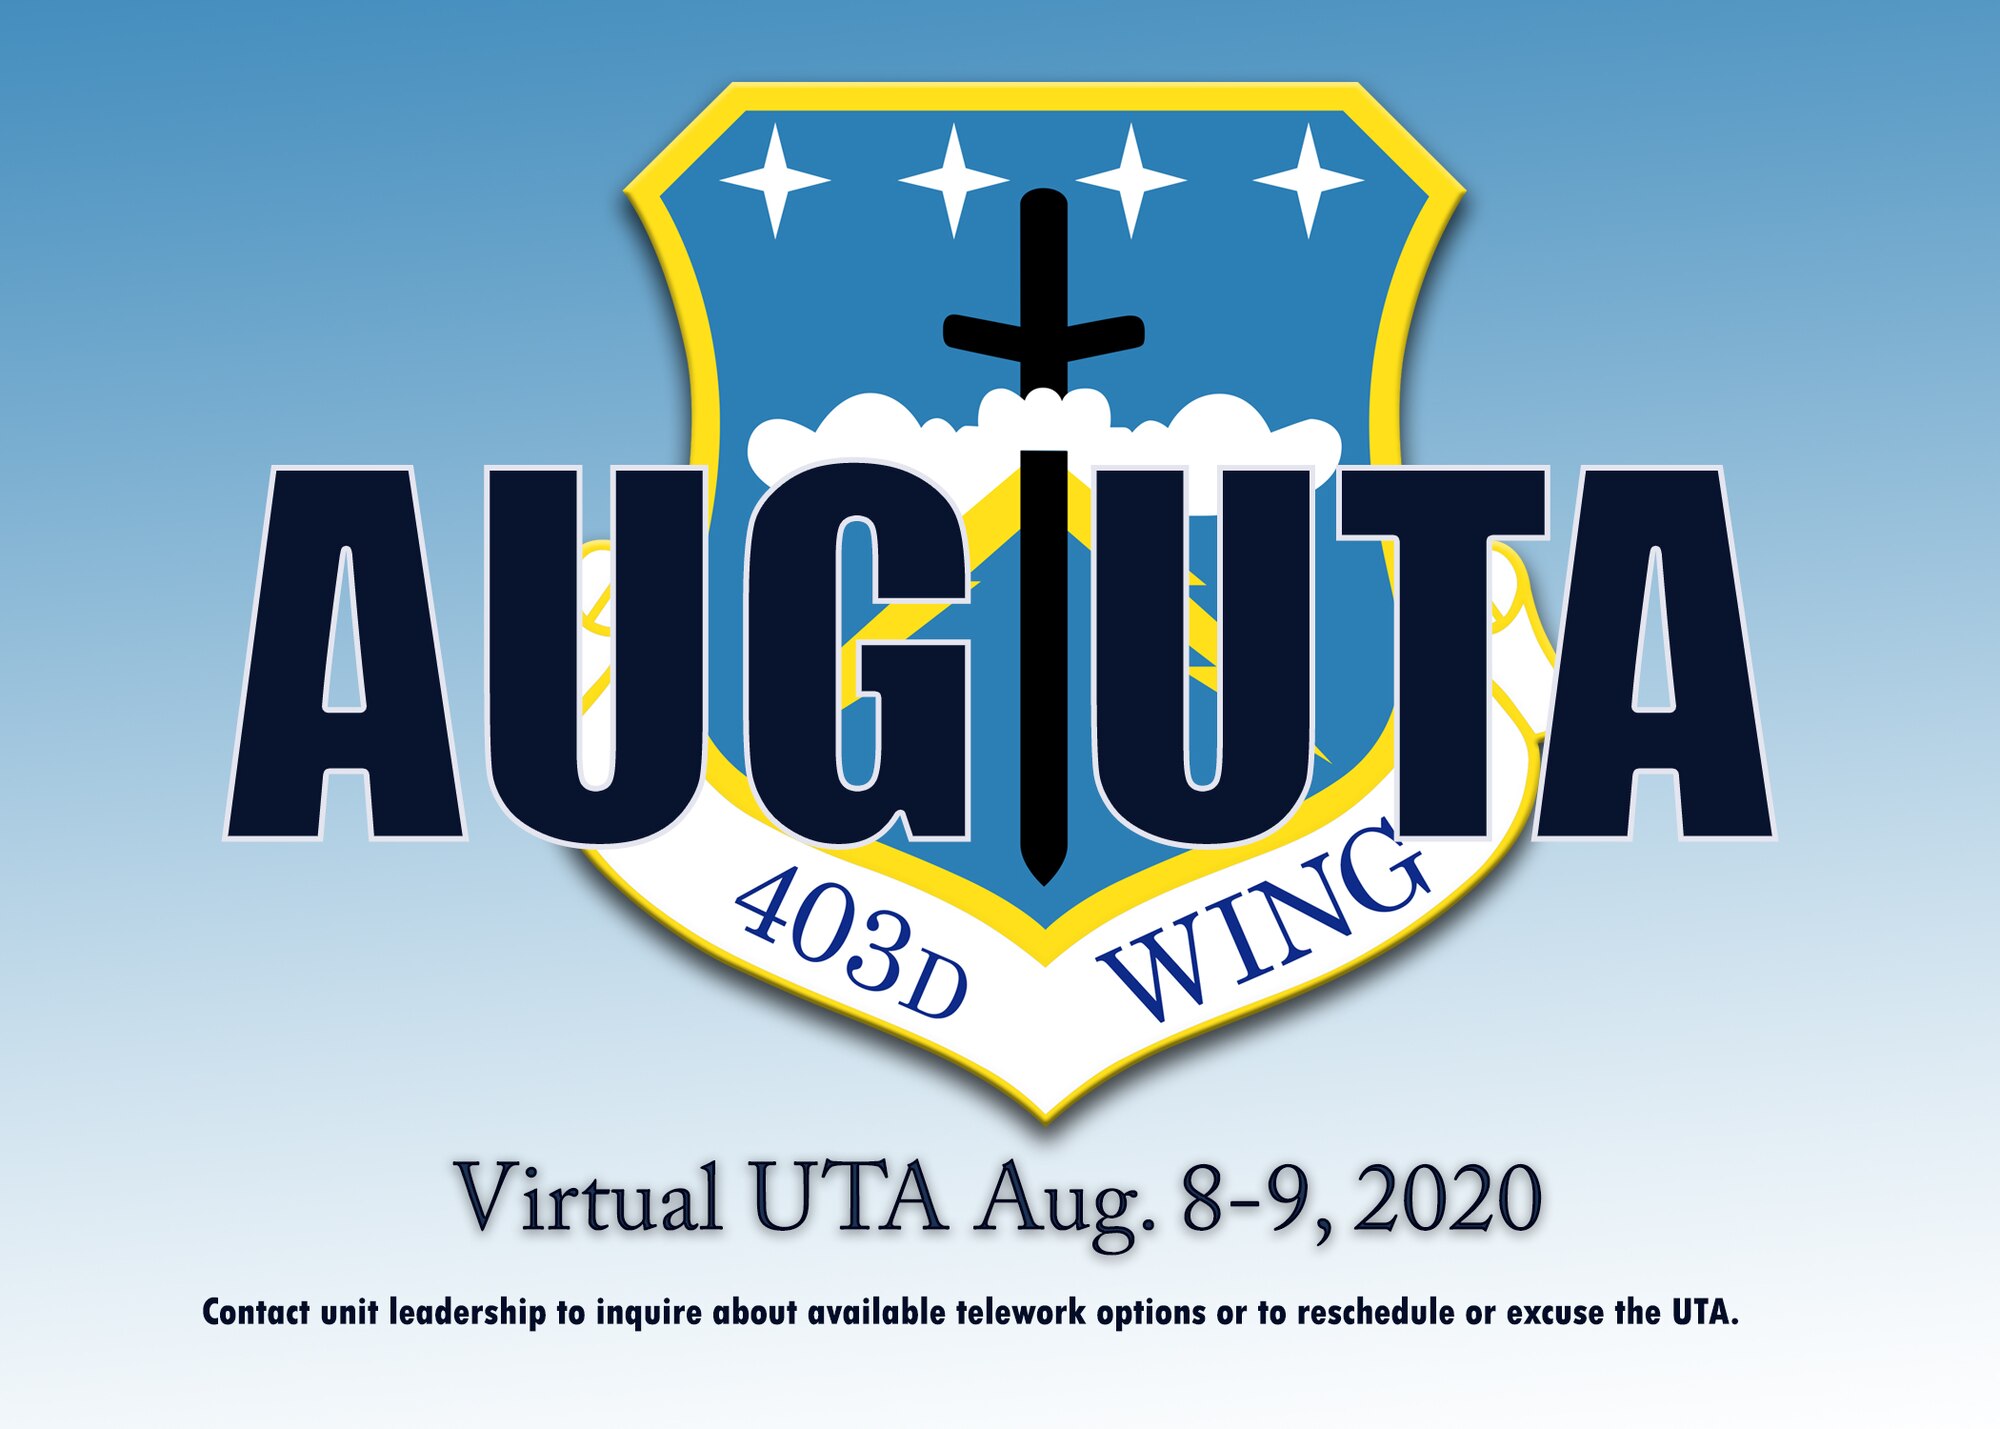 As part of ongoing COVID-19 mitigation efforts, the 403rd Wing is having a virtual Unit Training Assembly Aug. 8-9 for Airmen who do not have in person appointments or readiness requirements.Wing Reserve Citizen Airmen should coordinate with their supervisors and commanders to inquire about telework options or to reschedule or excuse the UTA. (U.S. Air Force graphic by Lt. Col. Marnee A.C. Losurdo)